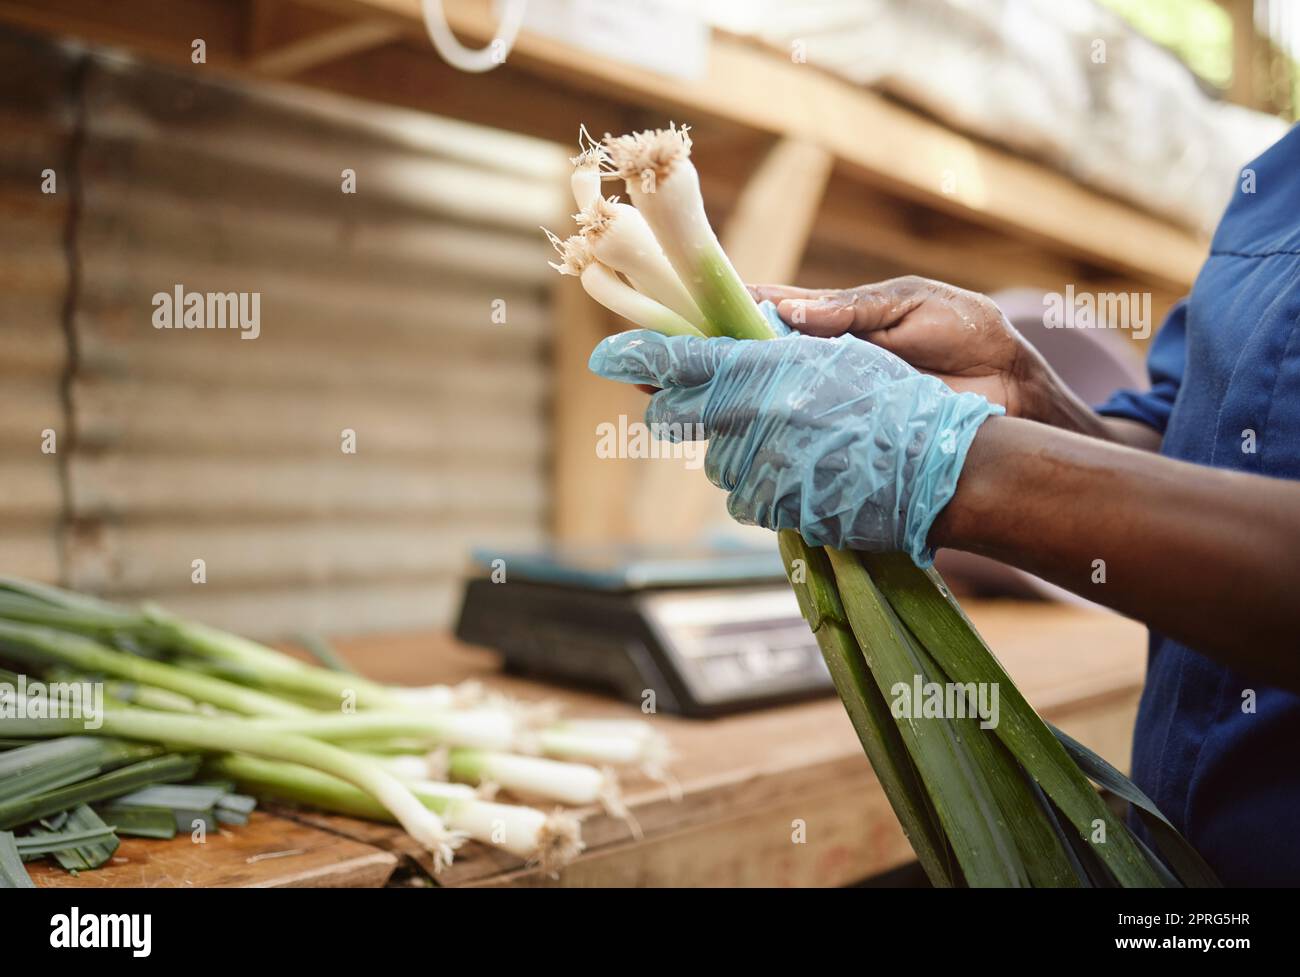 Farm, worker sorting spring onions for vegetable market. Health groceries and sale of green consumer products and lifestyle. Nature, agriculture and food industry for grocery or supermarket. Stock Photo